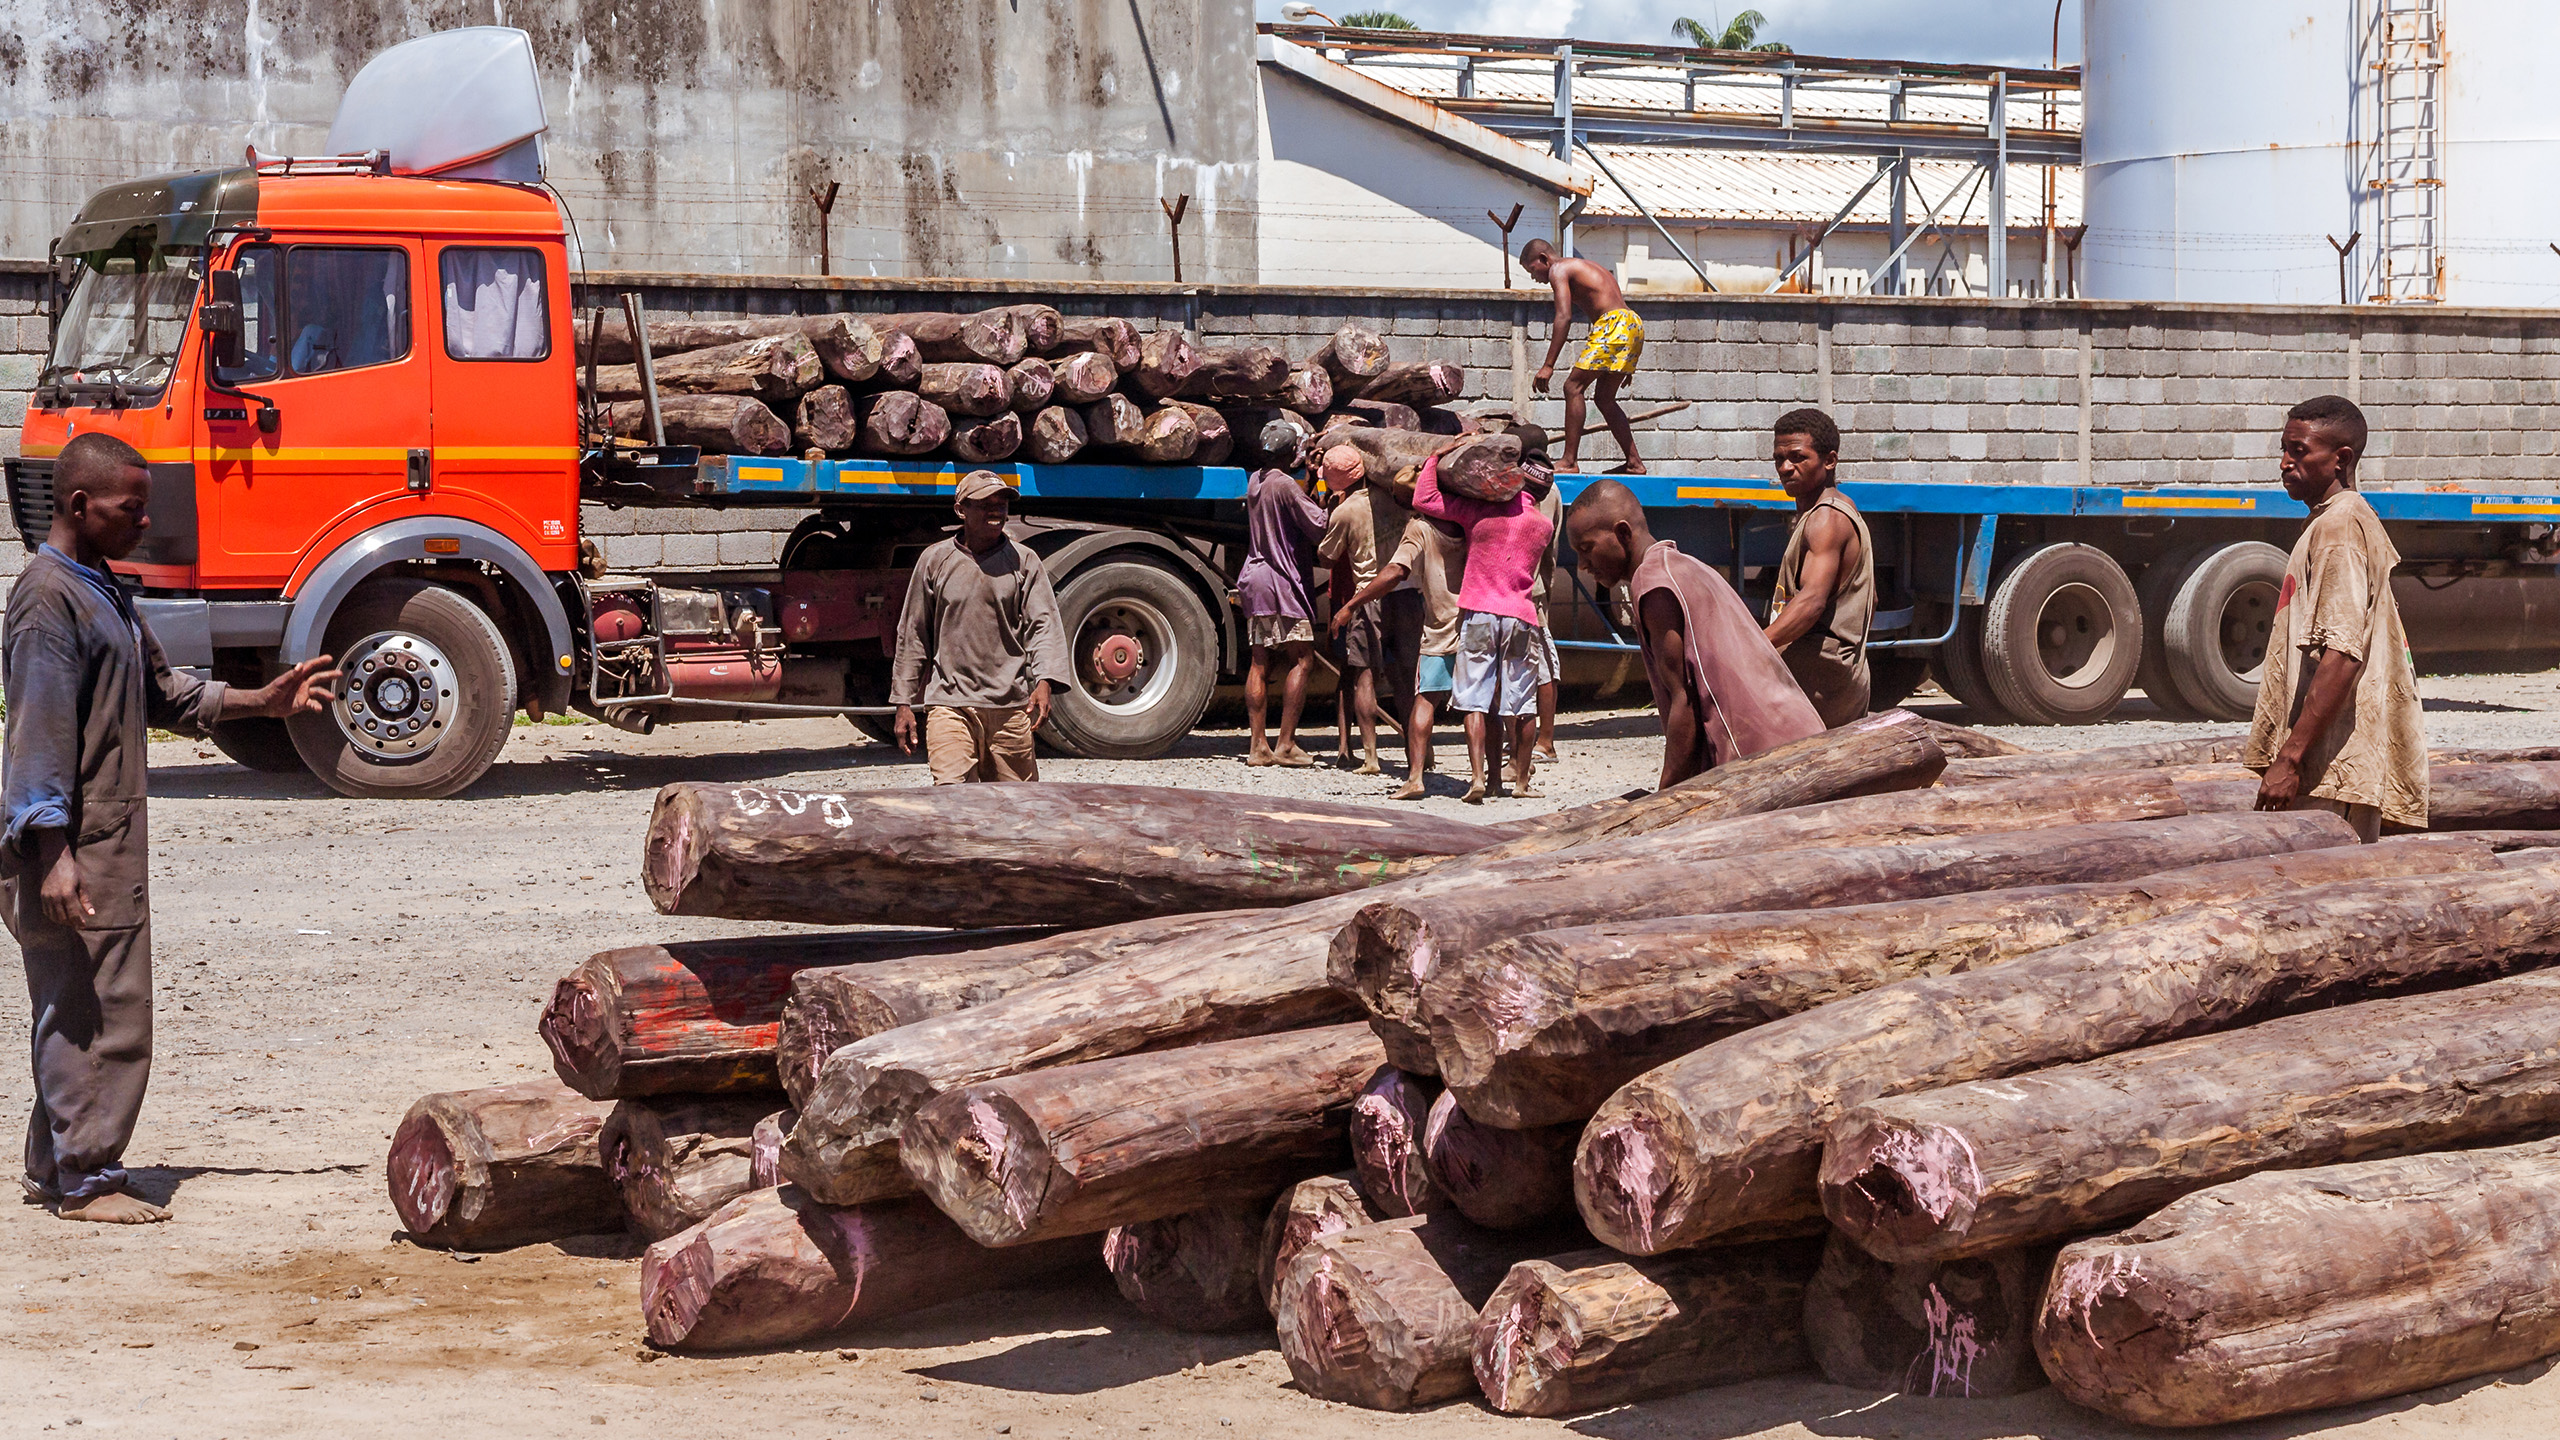 Deforestation of precious woods, such as here near Toamasina in eastern Madagascar, causes considerable damage. | Pierre-Yves Babelon/Shutterstock